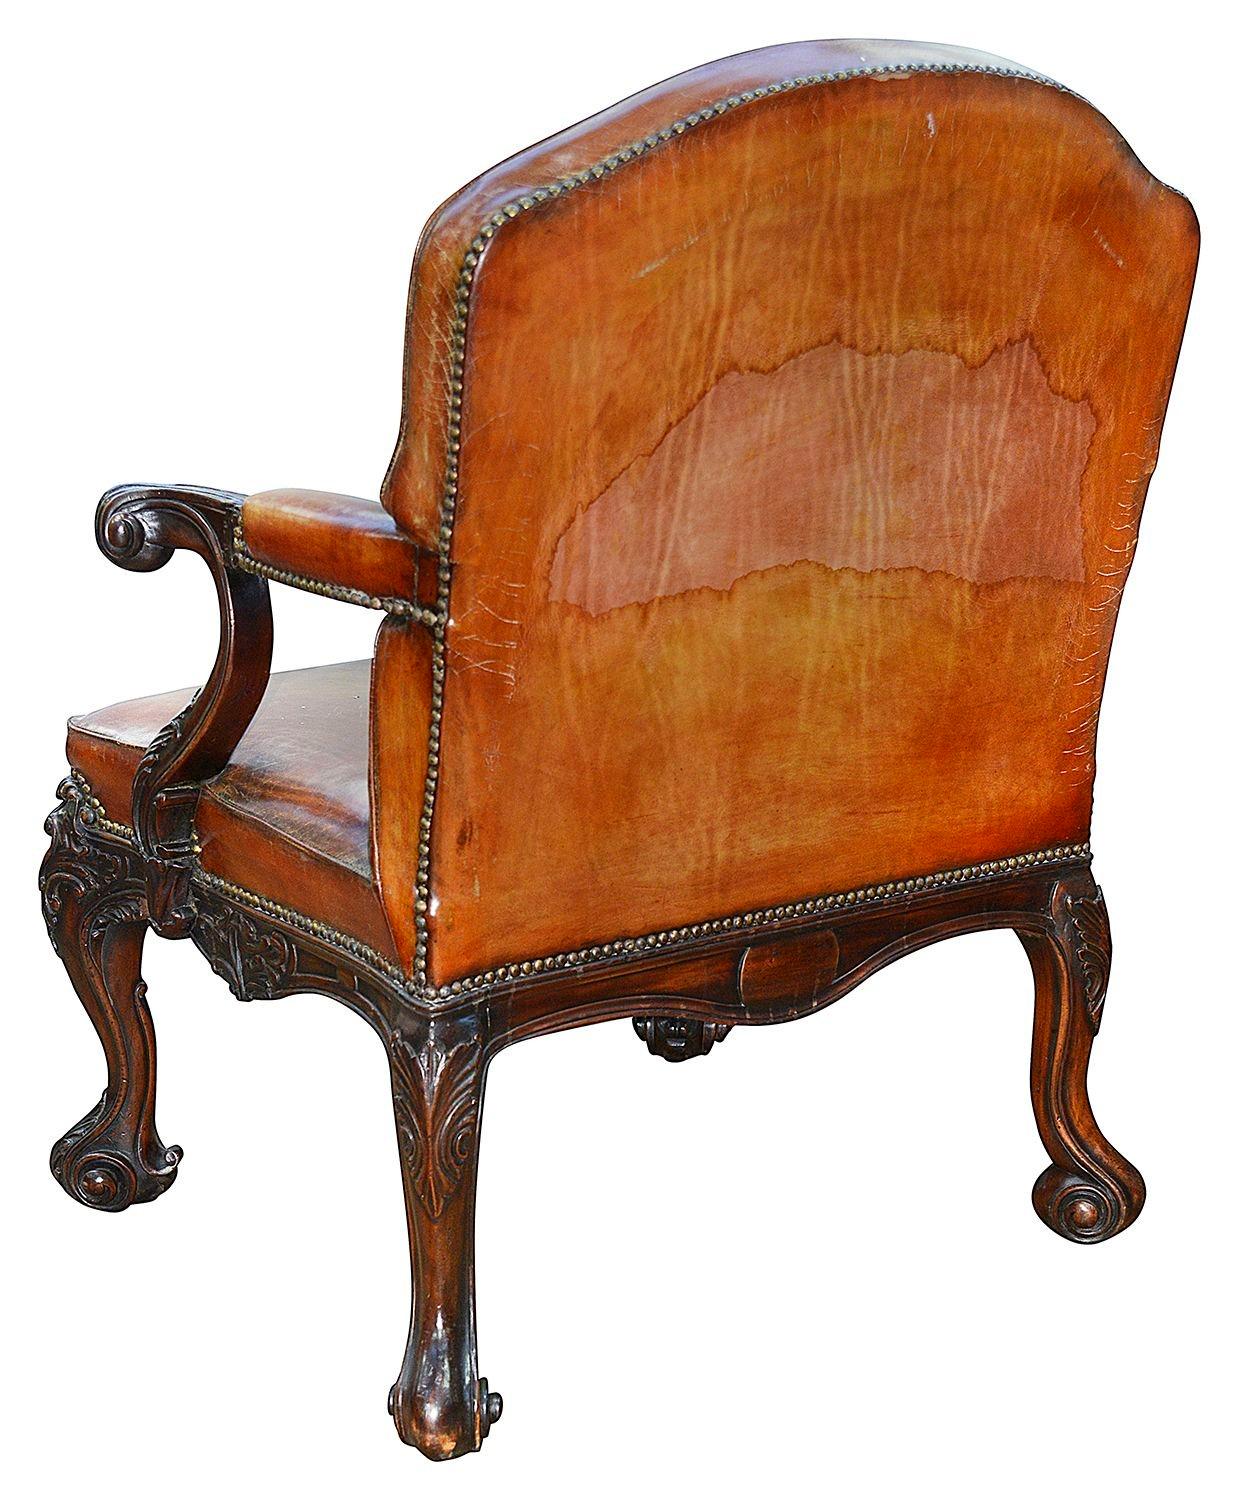 19th Century Geogian Style Mahogany Desk Chair For Sale